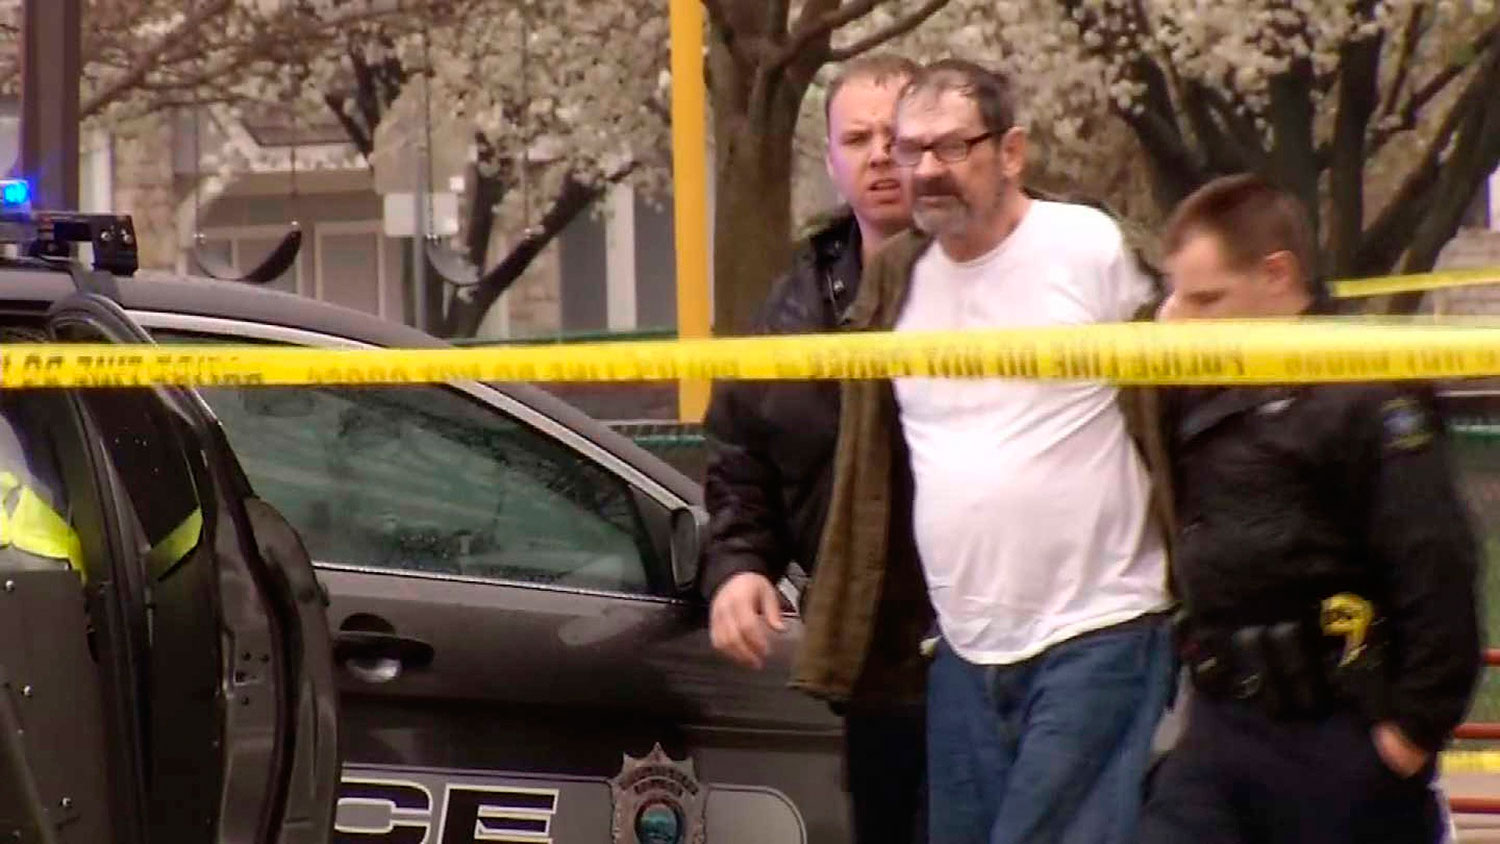 Frazier Glenn Cross, 73, of Aurora, Missouri, is led to a police car after his arrest following shooting incidents which killed three people at two Jewish centers on Sunday in Overland Park, south of Kansas City, Kansas in a still image from video April 13, 2014.